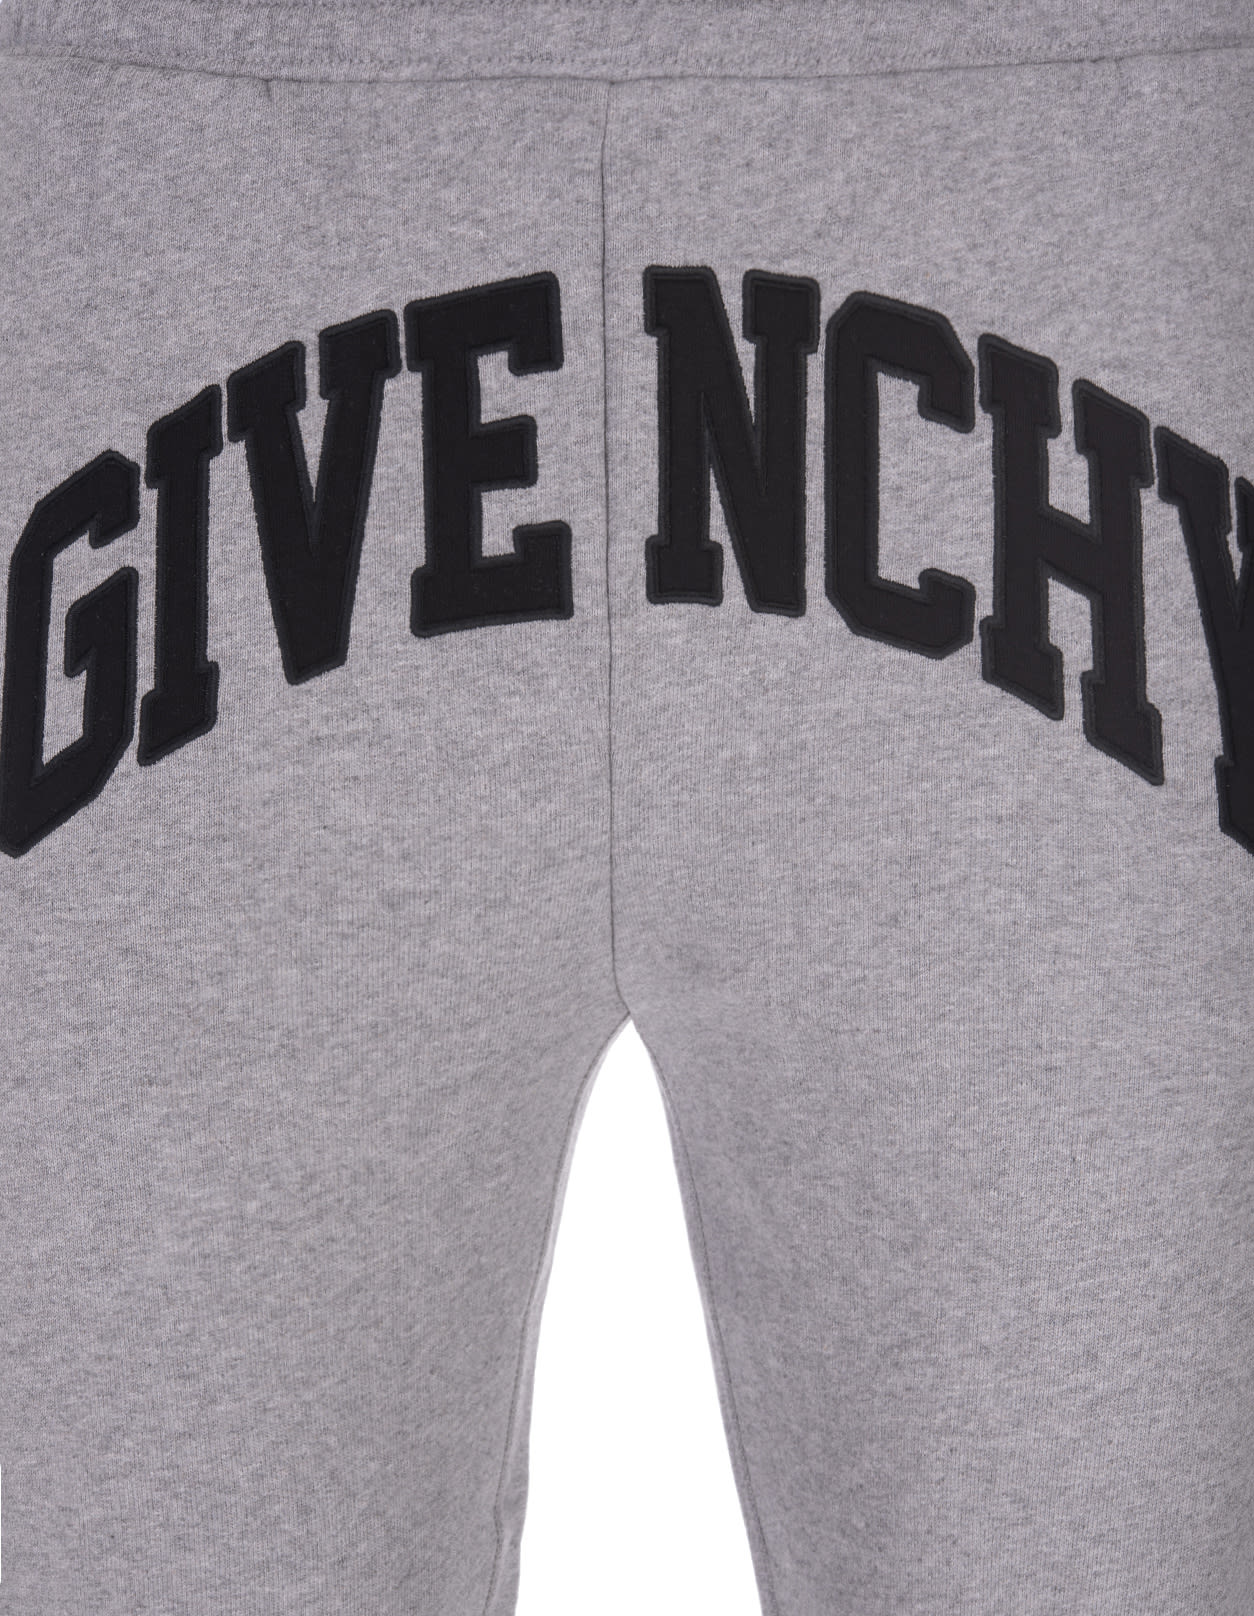 Shop Givenchy Grey Joggers With Black Front Logo